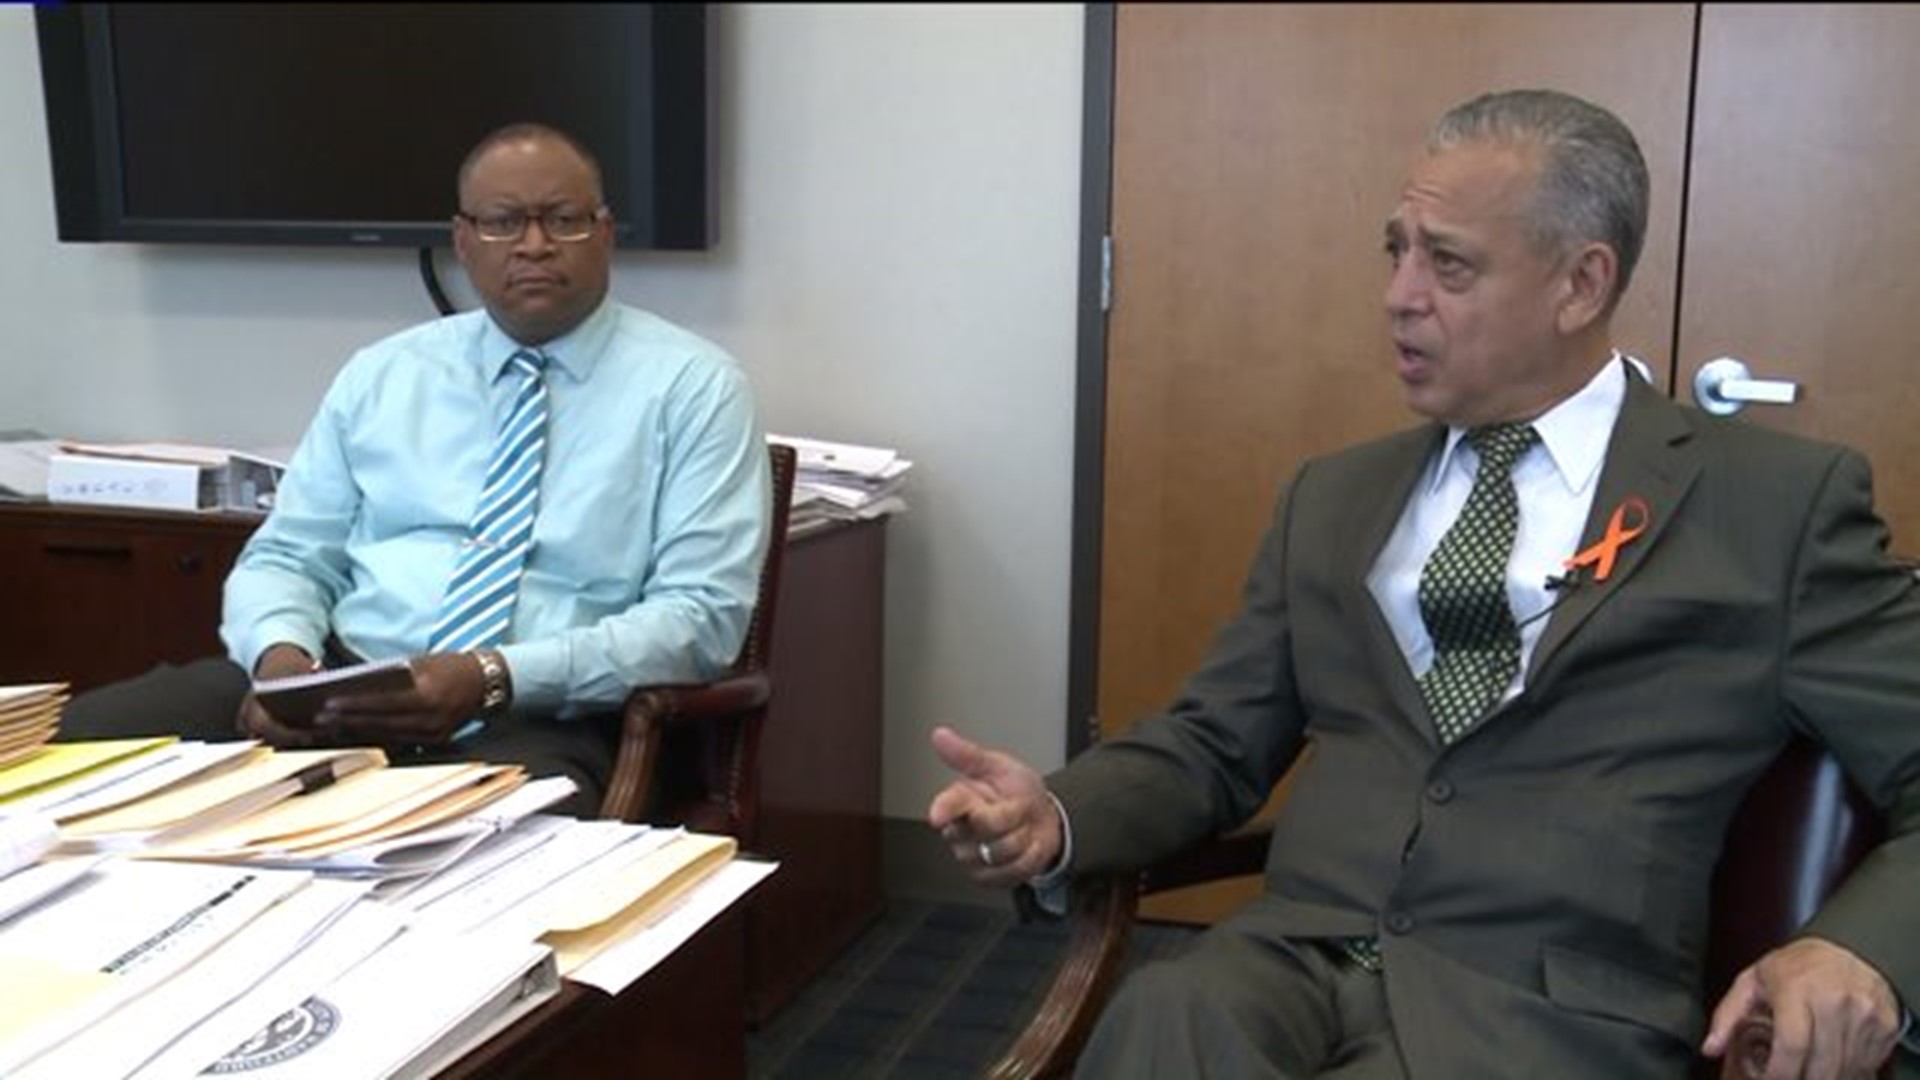 A day in the life of Mayor Segarra as Hartford deals with uptick in violence